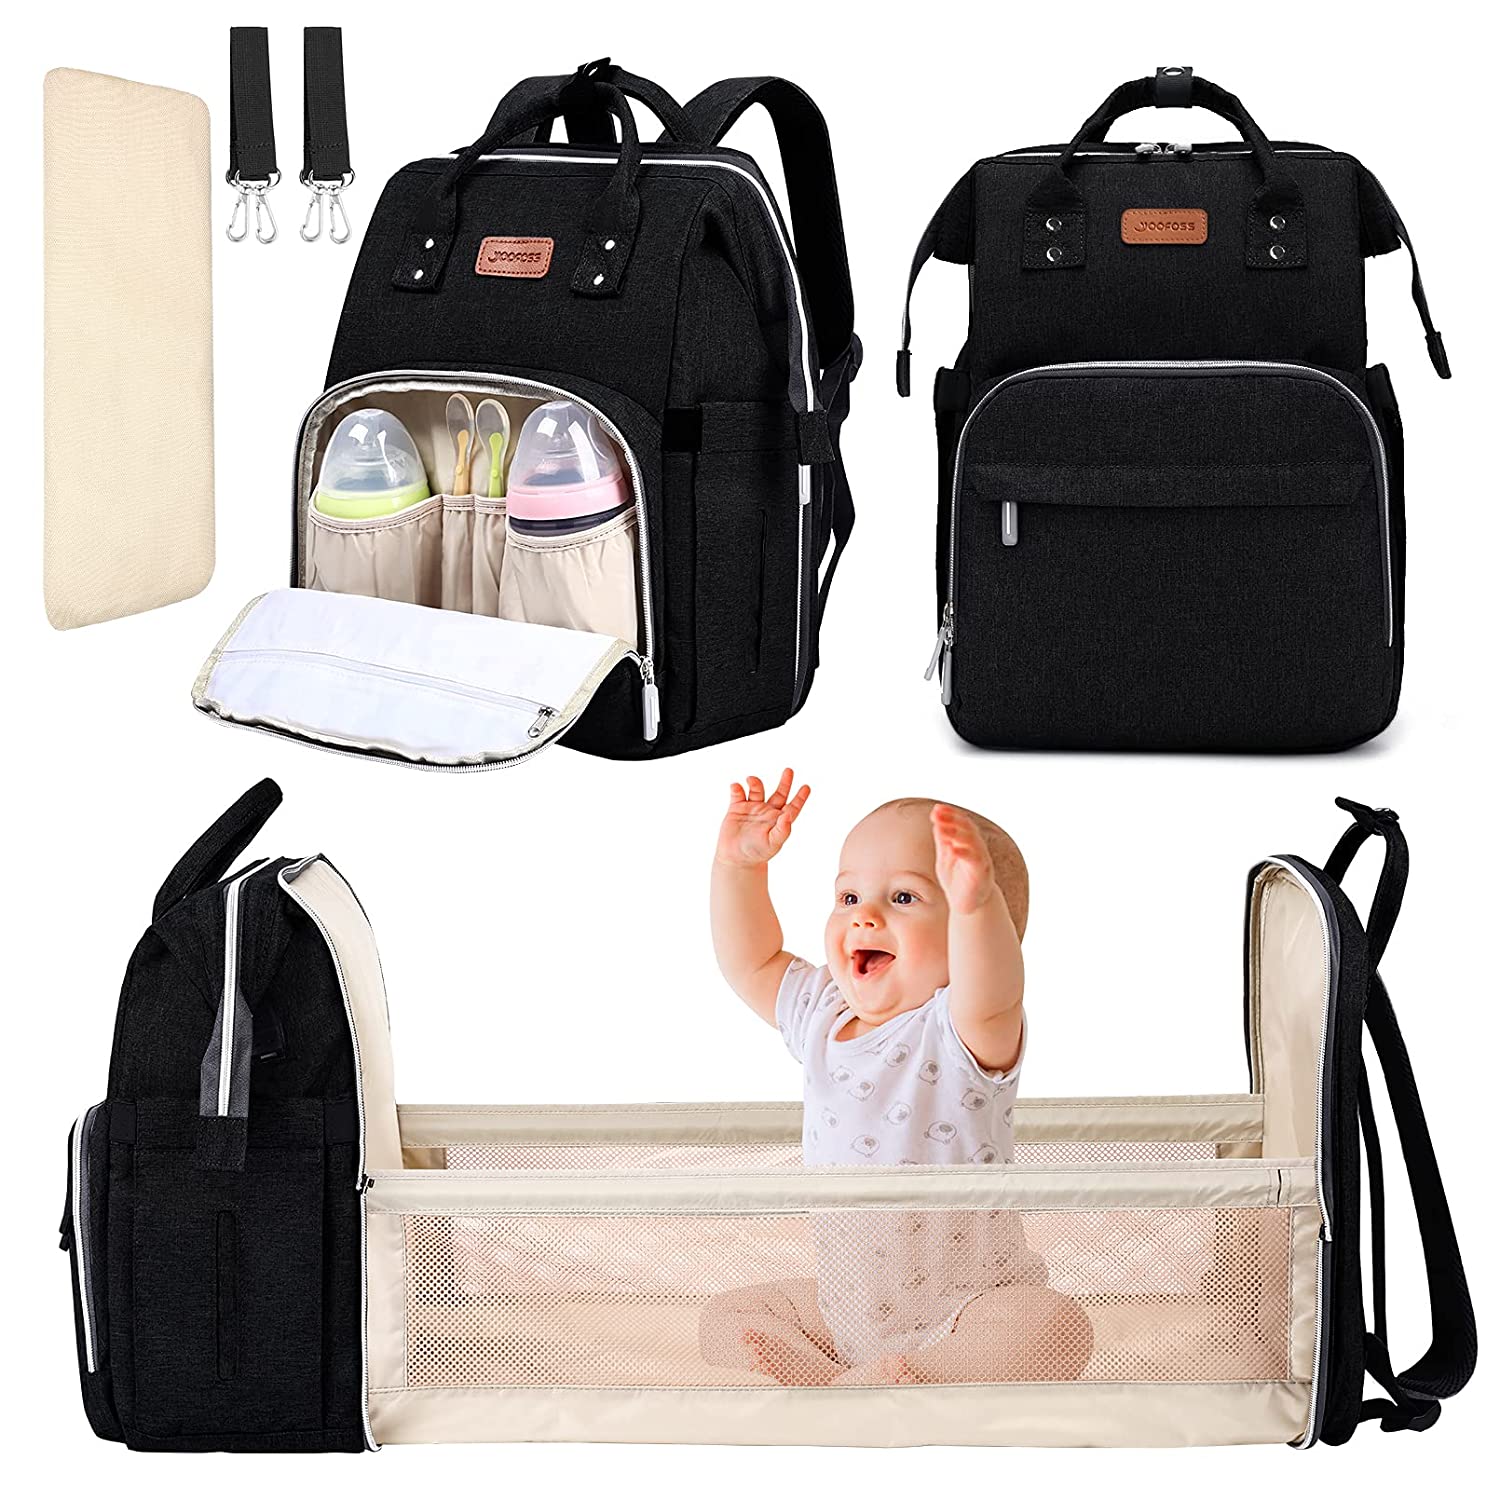 Baby Nappy Changing Bags Multifunction Waterproof Travel Diaper Back Pack